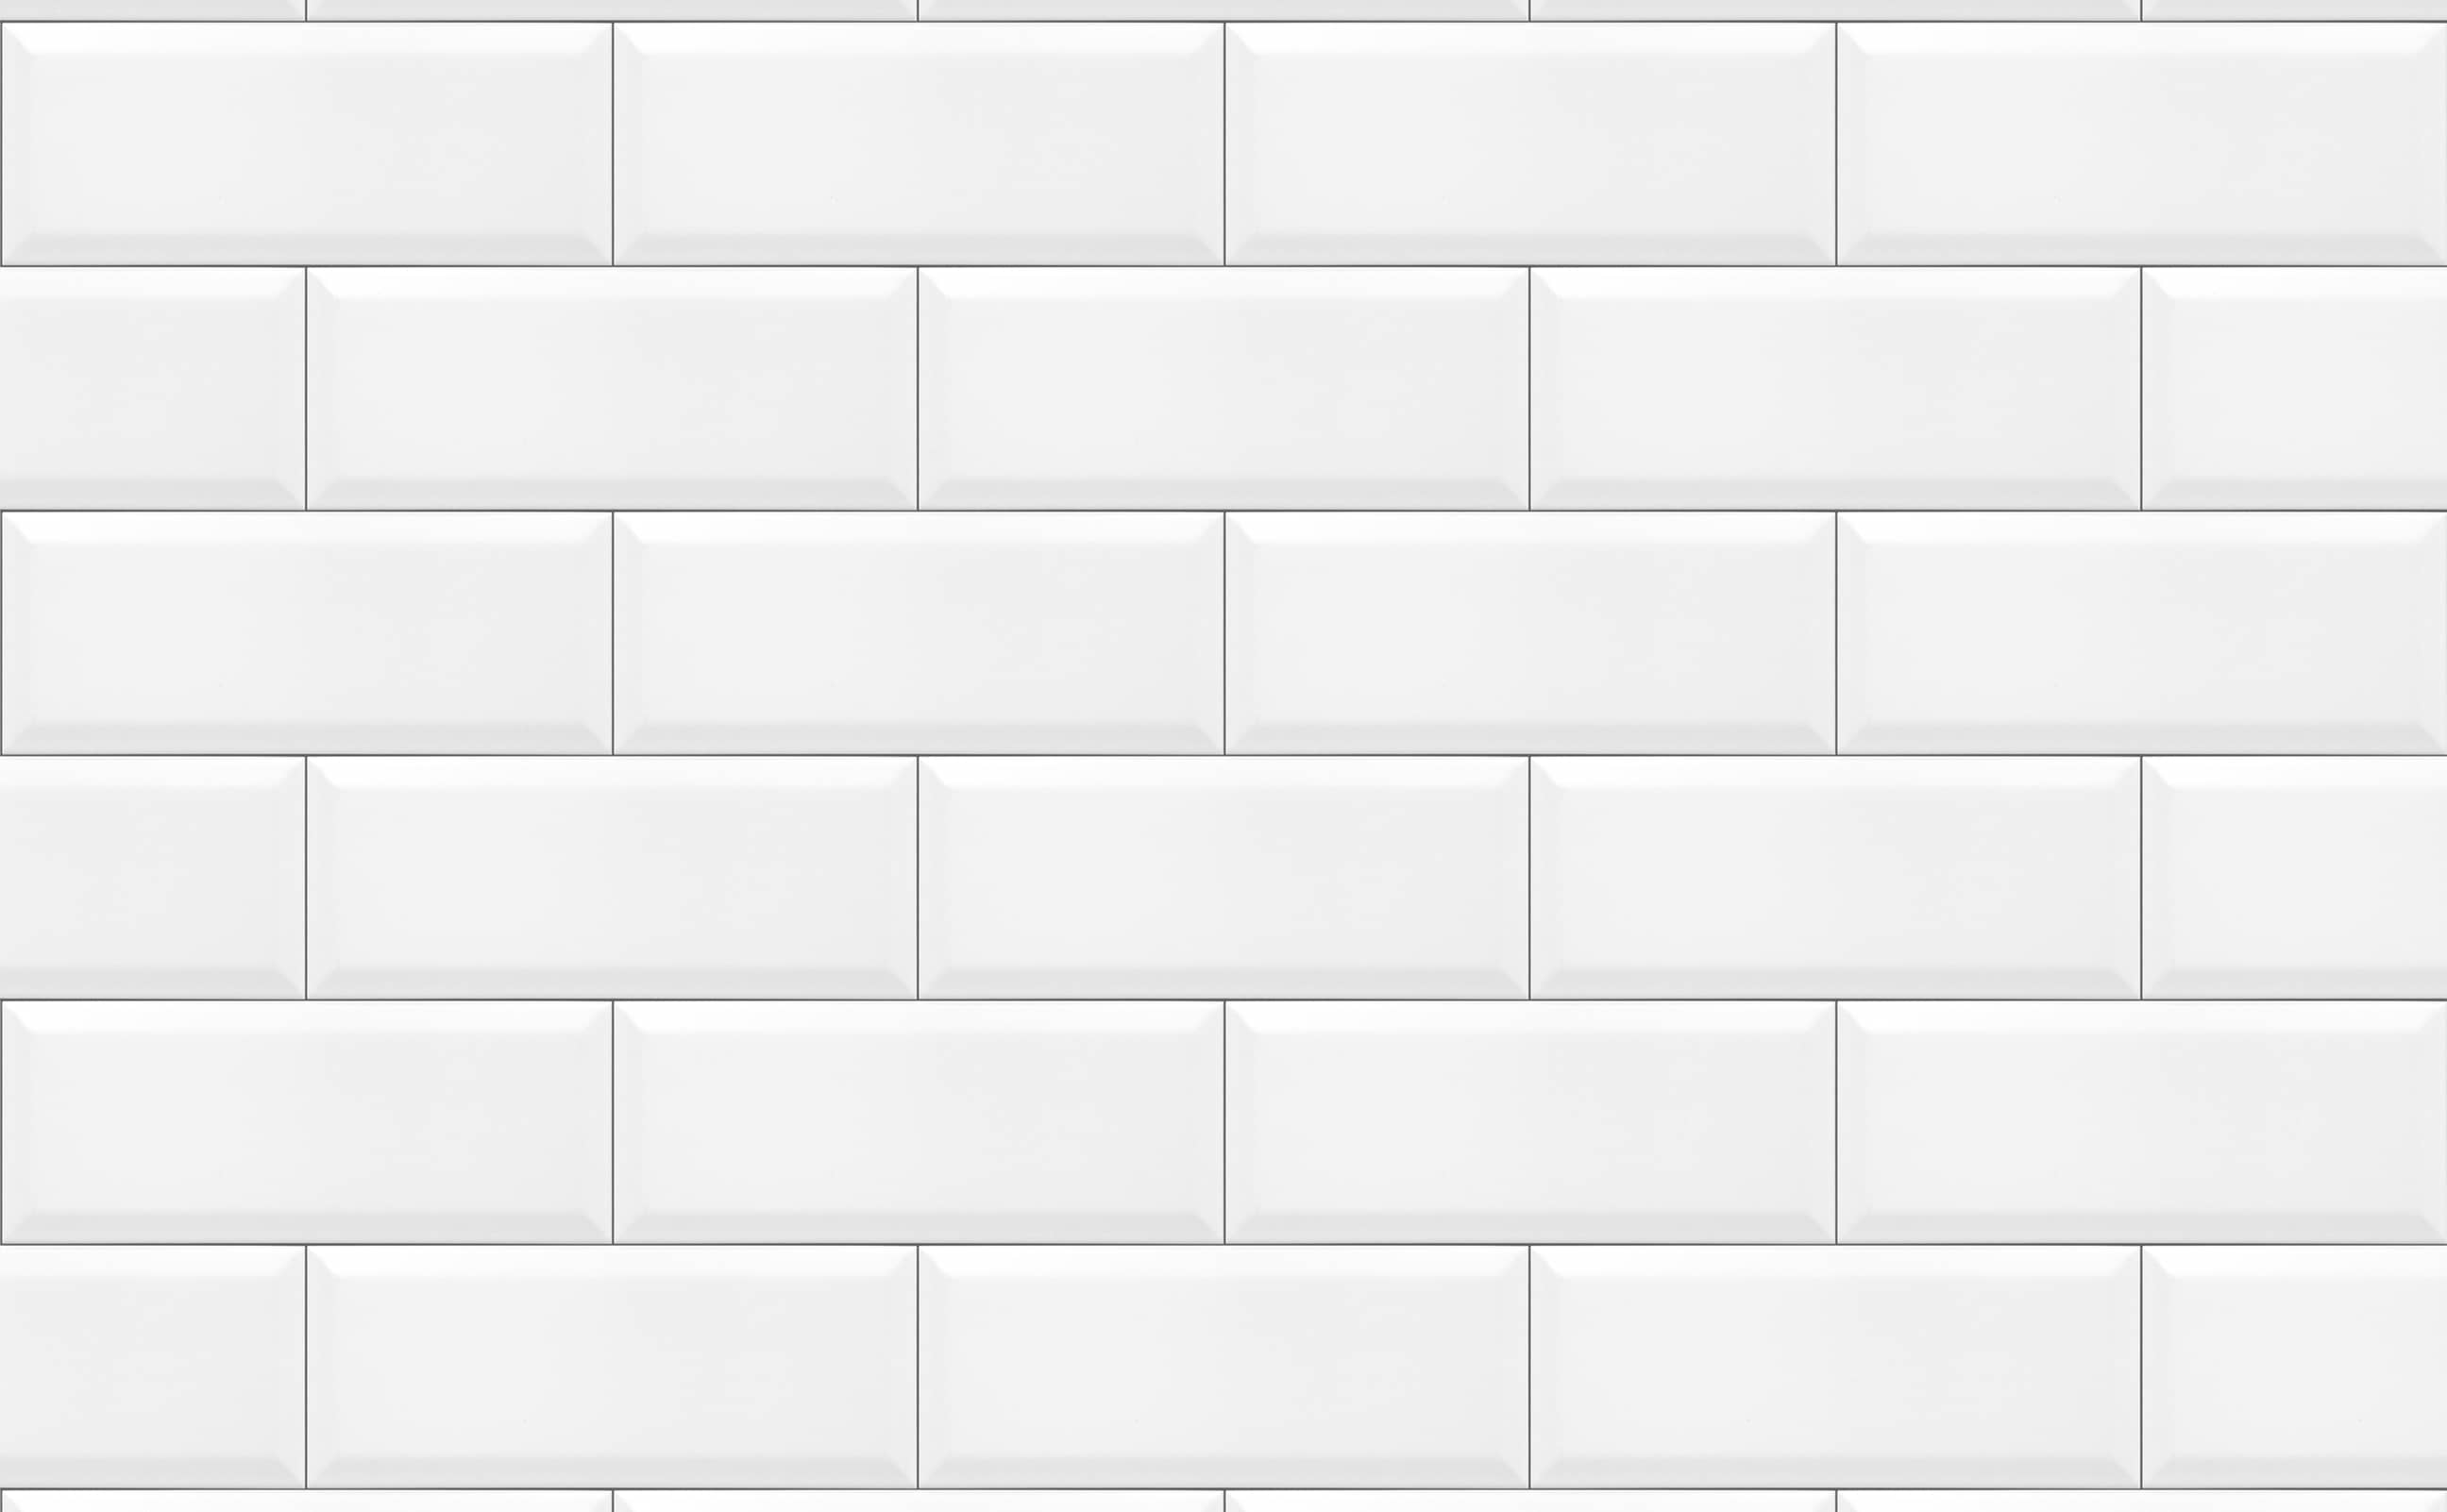 W0564 1s Classic Subway Tile Vintage Seamless Ceramic Texture   Classic Subway Repeating Pattern Sample 2 ?v=1602867284